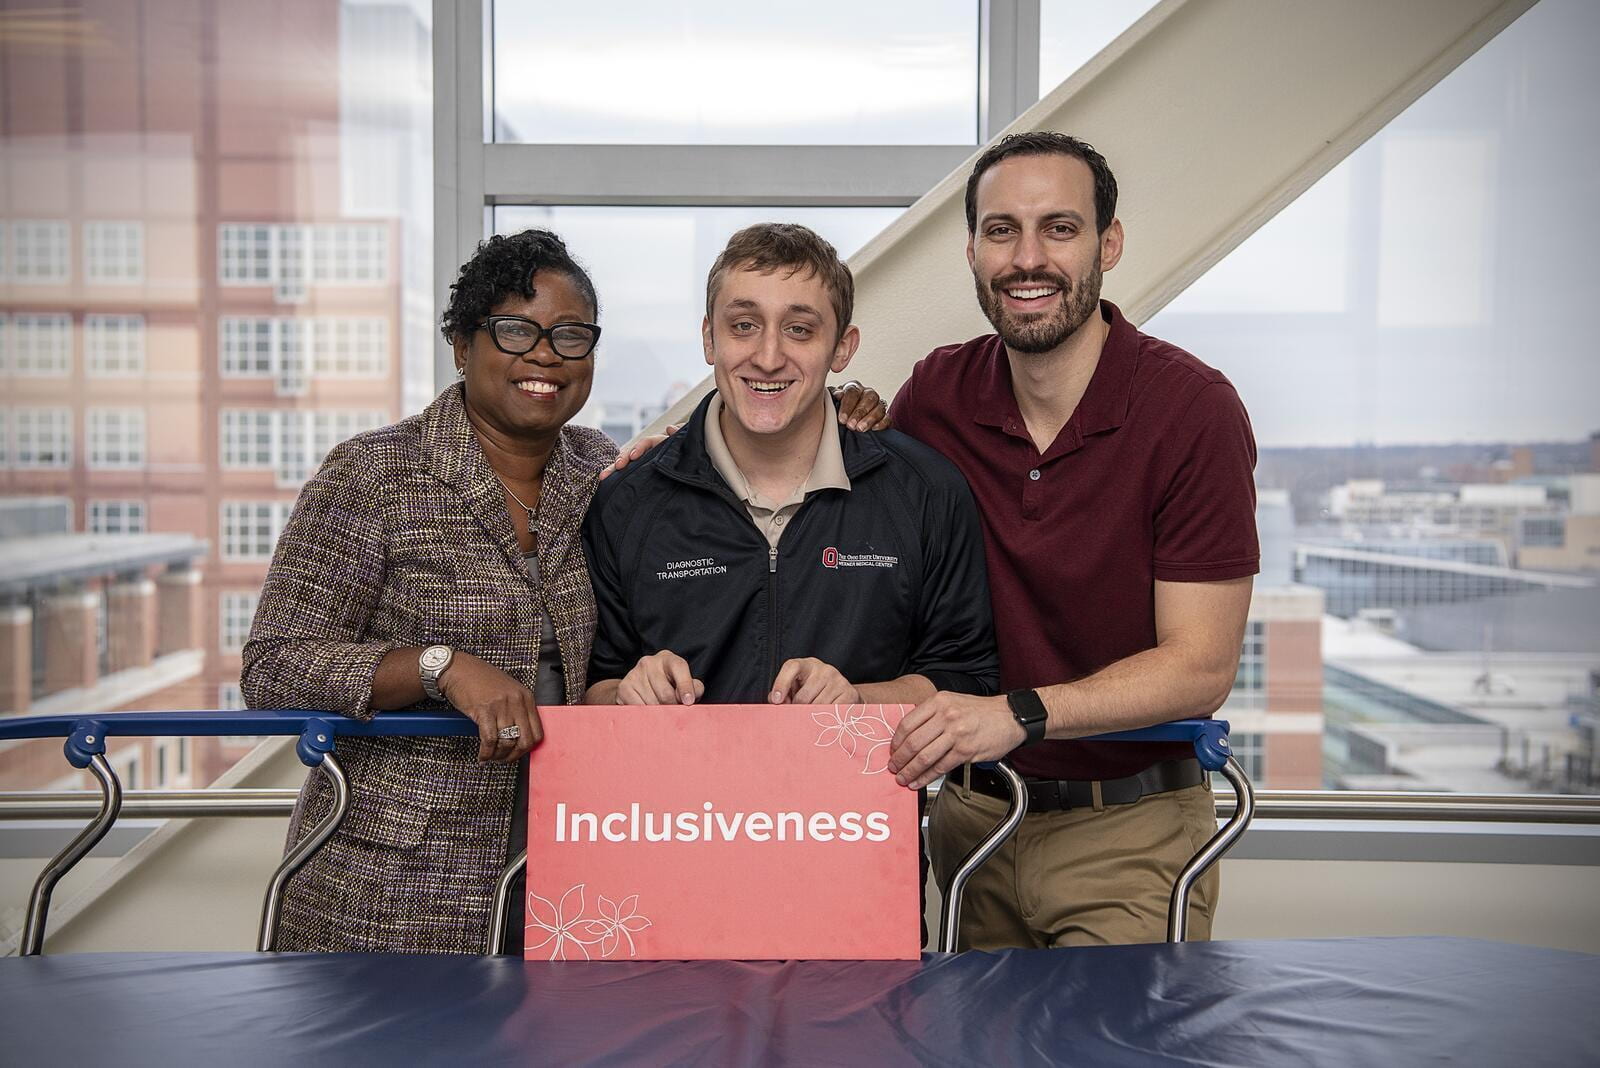 Ben and his two supervisors smiling in front of a patient transportation cart. They are holding a red sign that says "Inclusiveness"